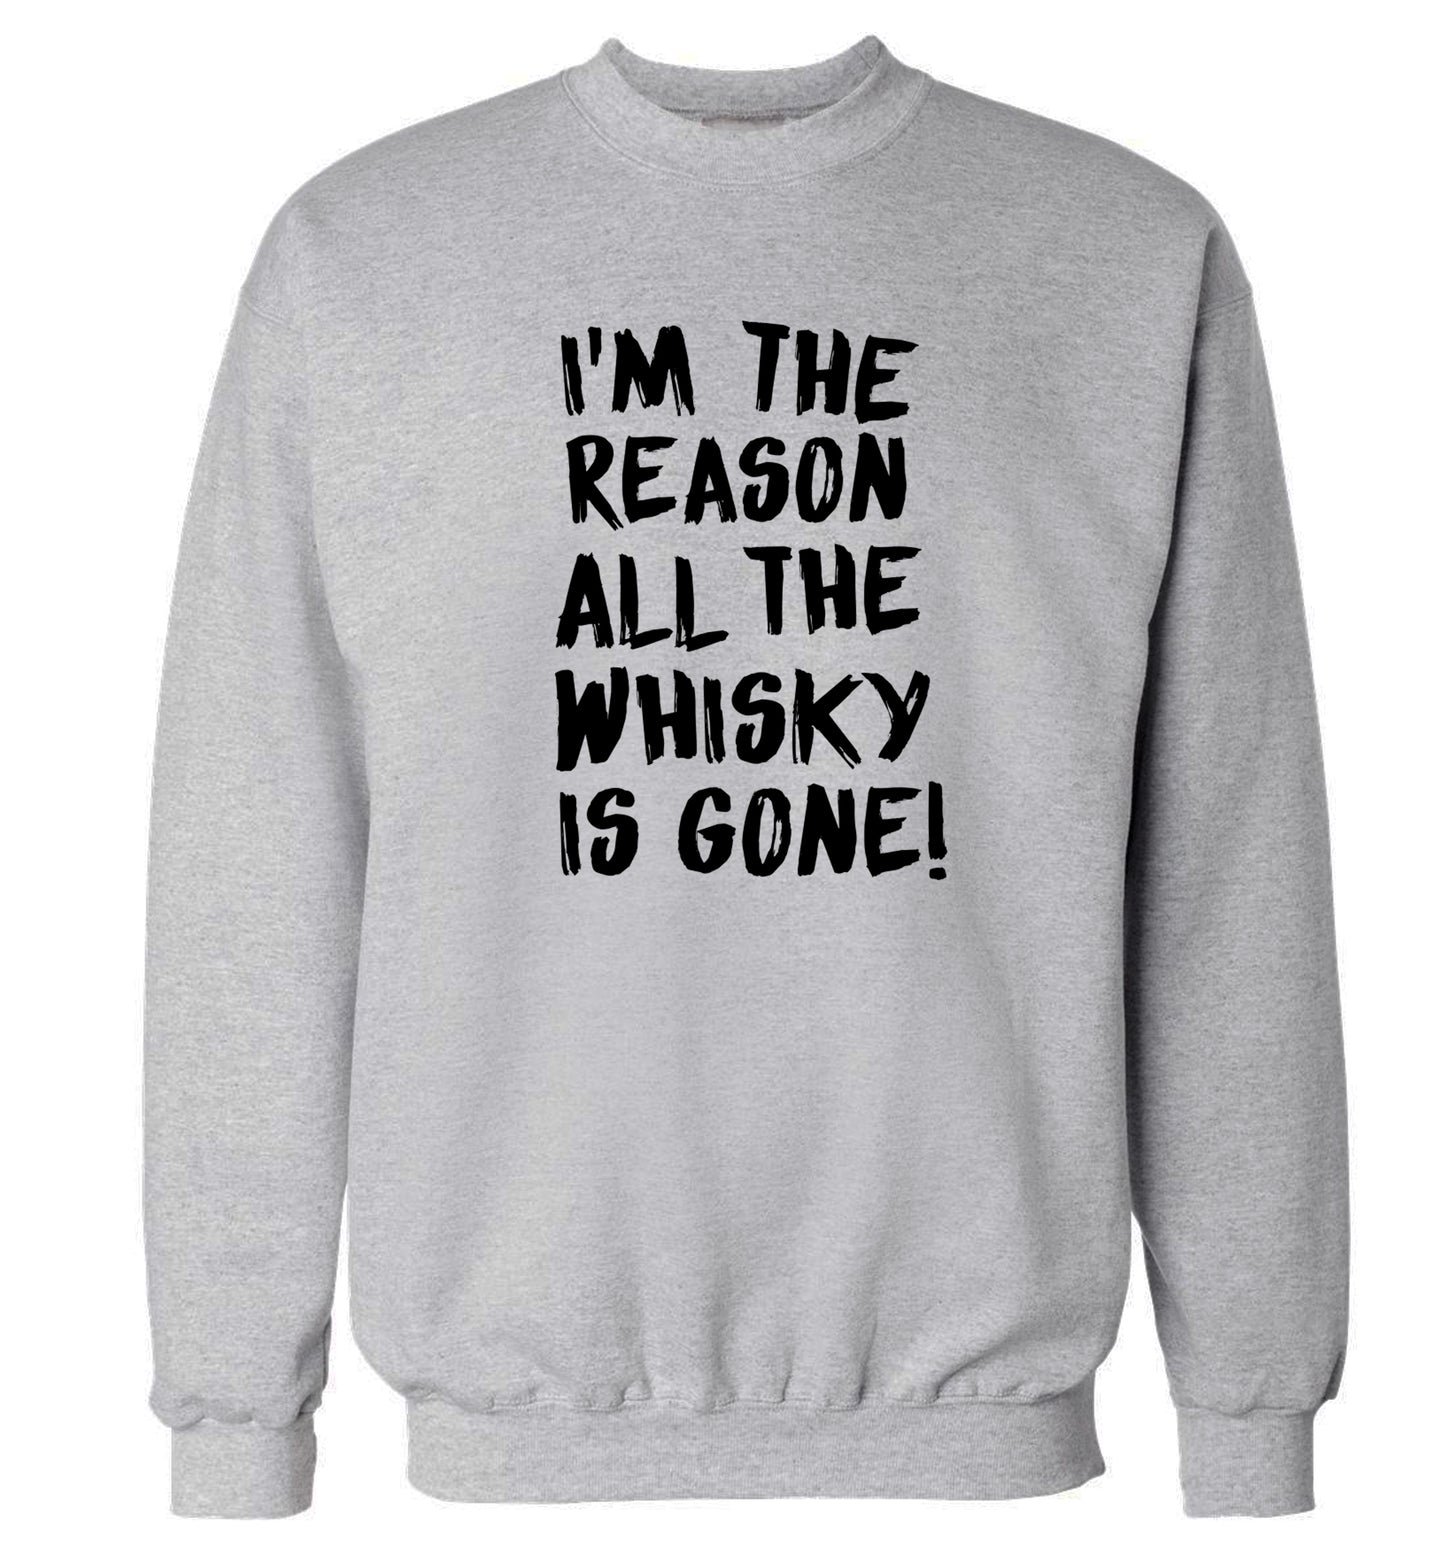 I'm the reason all the whisky is gone Adult's unisex grey Sweater 2XL